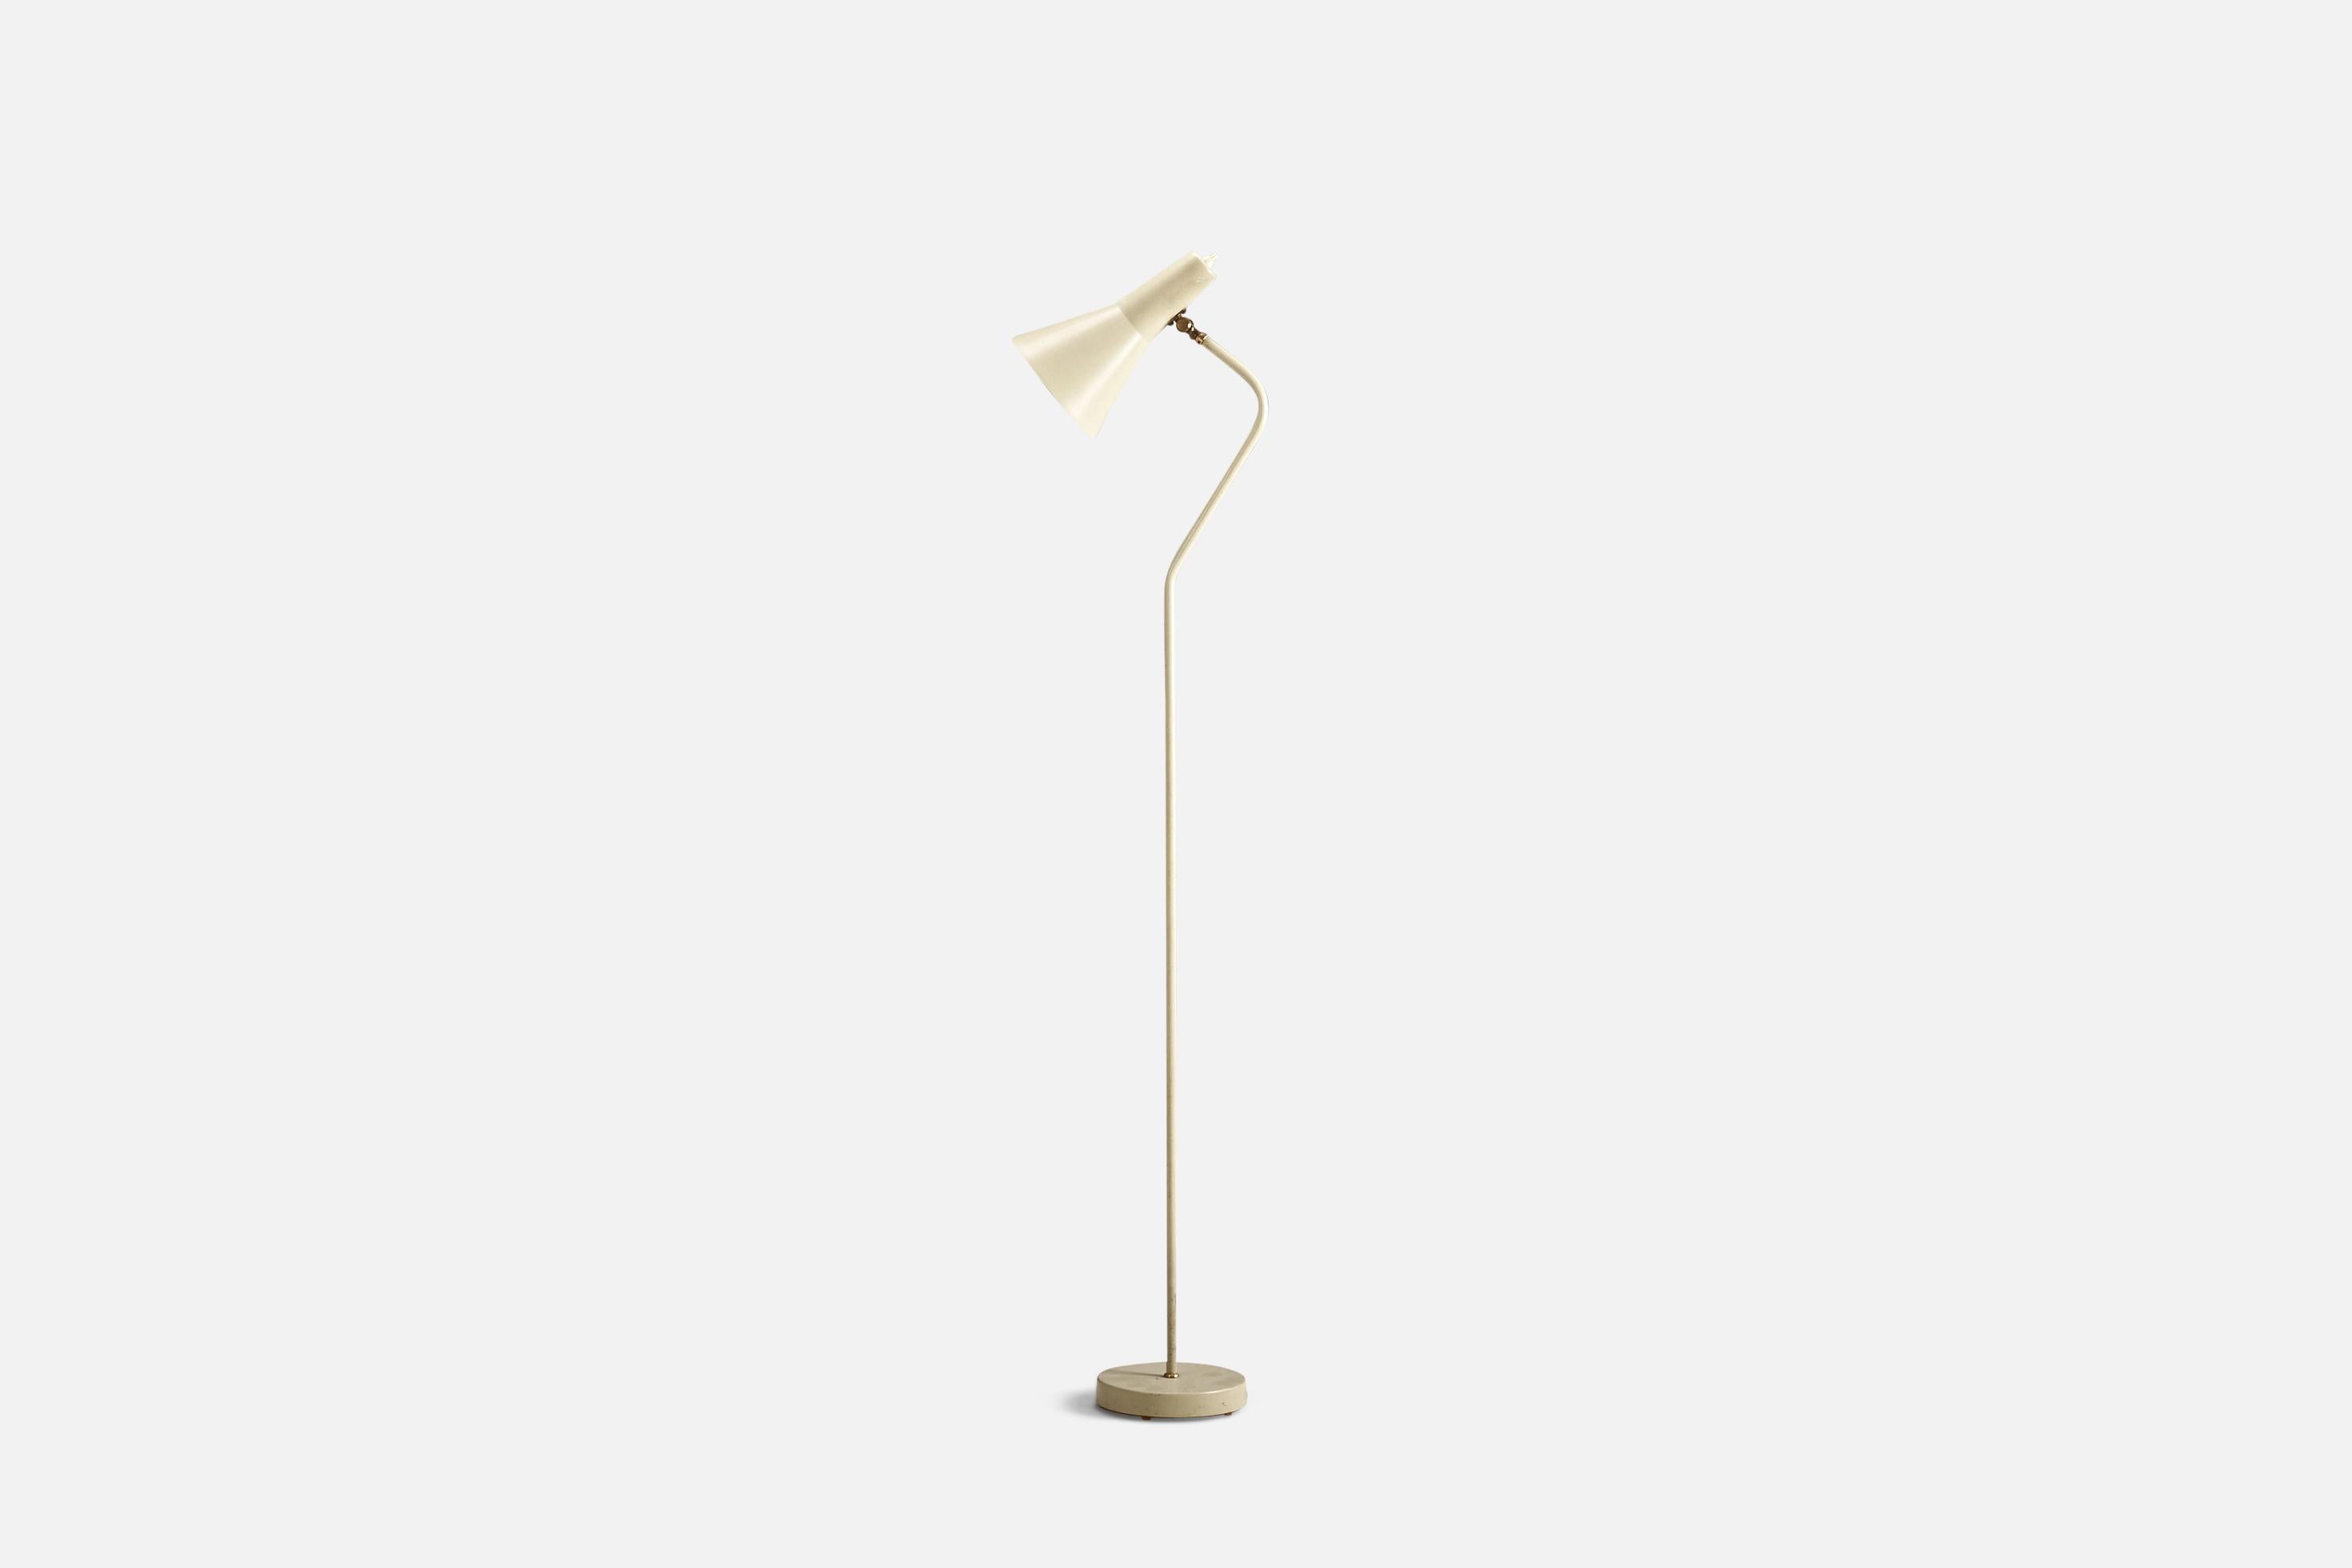 A brass and metal floor lamp designed by Erik Wärnå and produced by EWÅ Värnamo, Sweden, 1950s.

Socket takes standard E-26 medium base bulb.

There is no maximum wattage stated on the fixture.